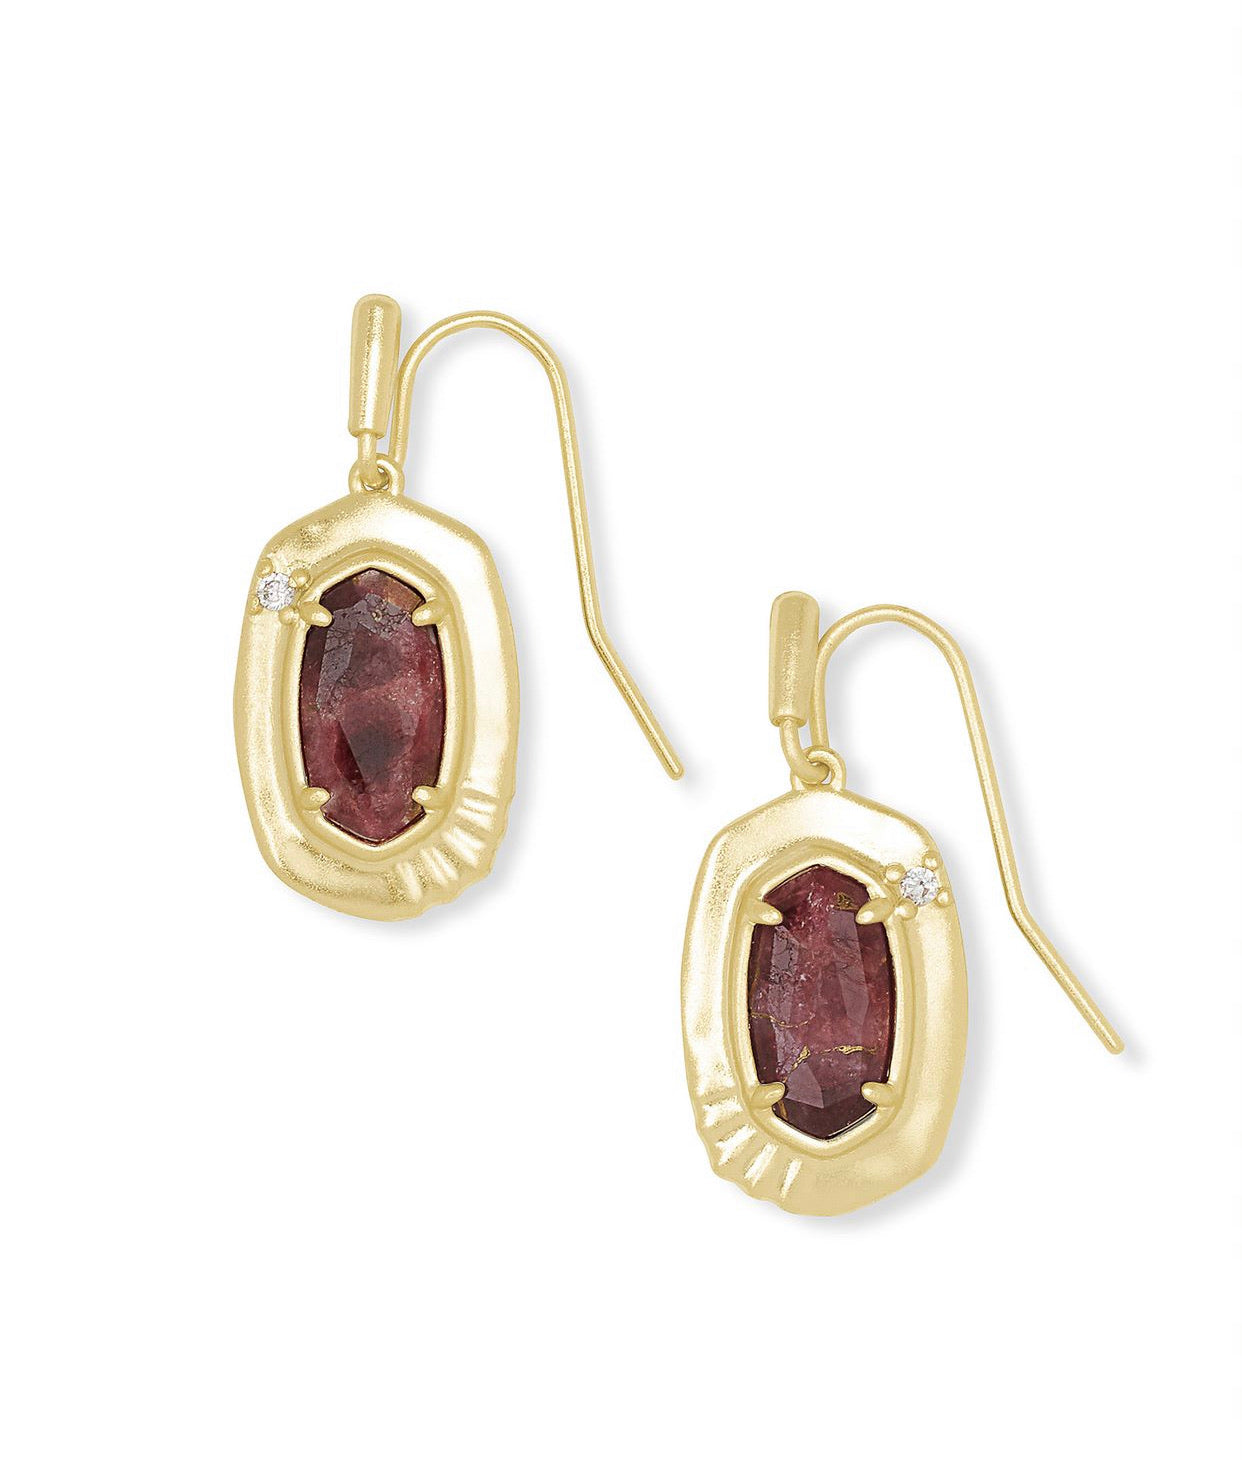 Kendra Scott Small Anna Drop Earring - Available in 4 Colors